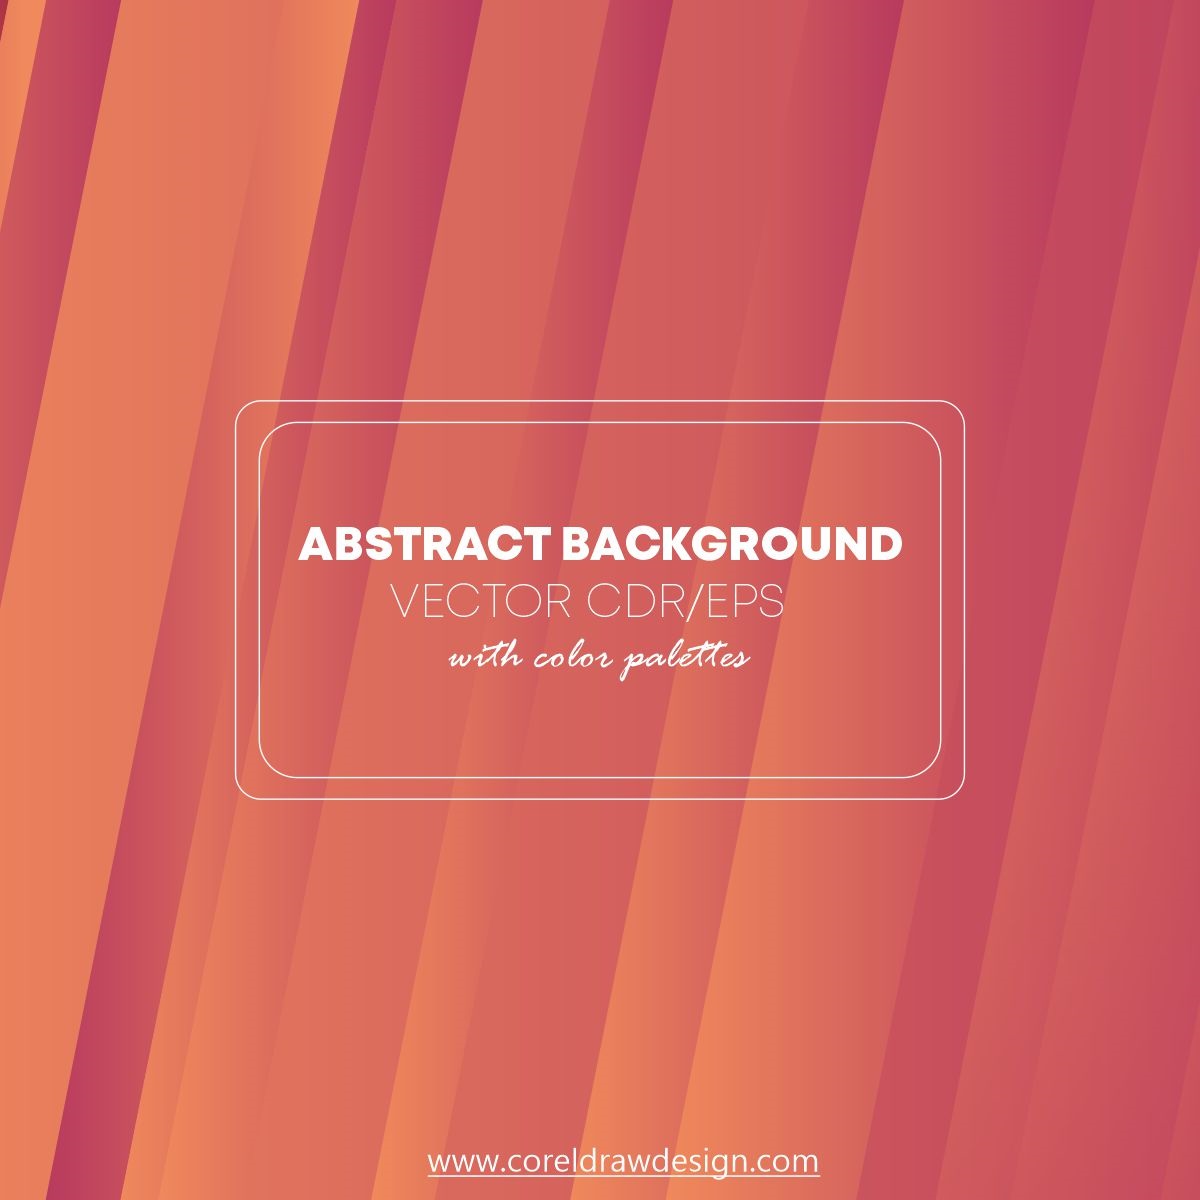 FULL VECTOR BACKGROUND FREE